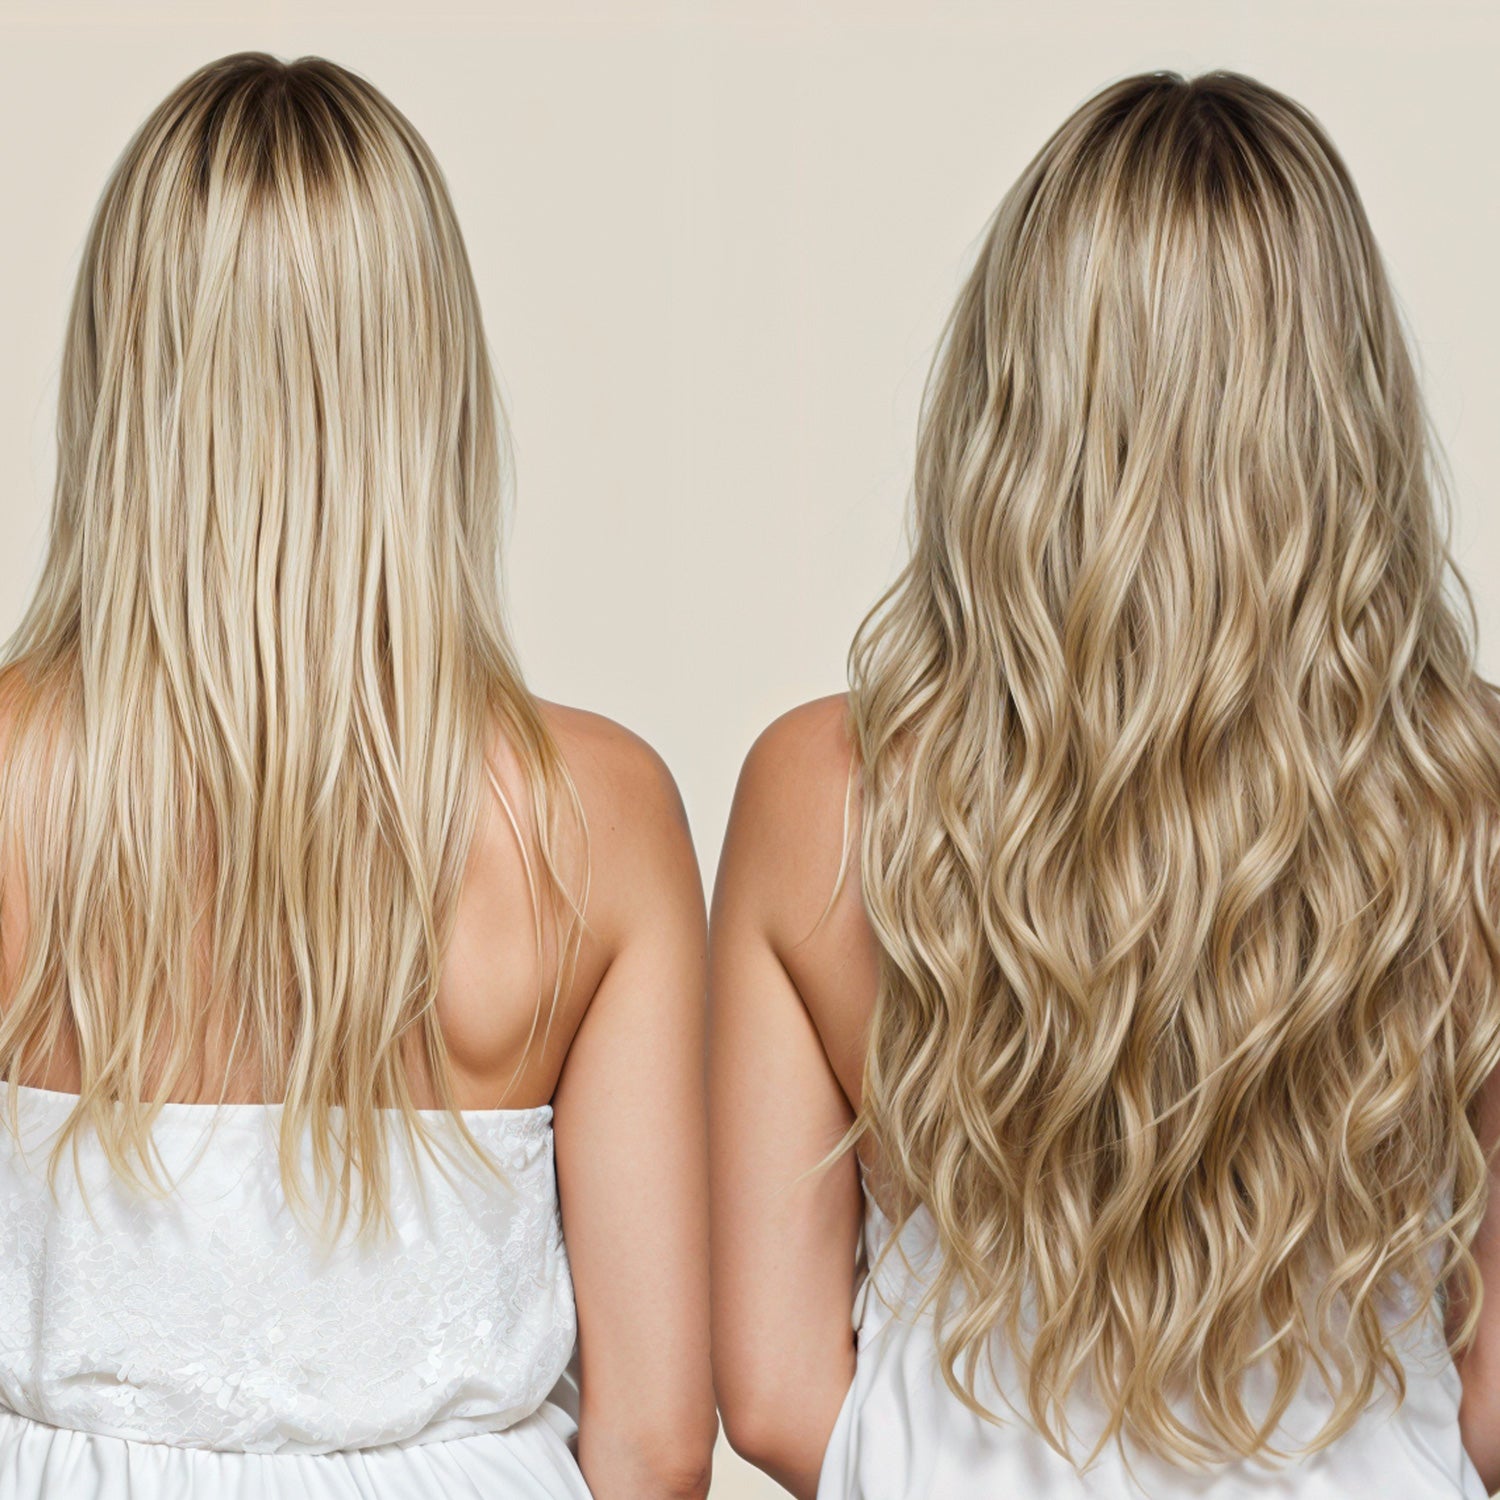 22 inch hair extensions 23 inch tape in hair extensions